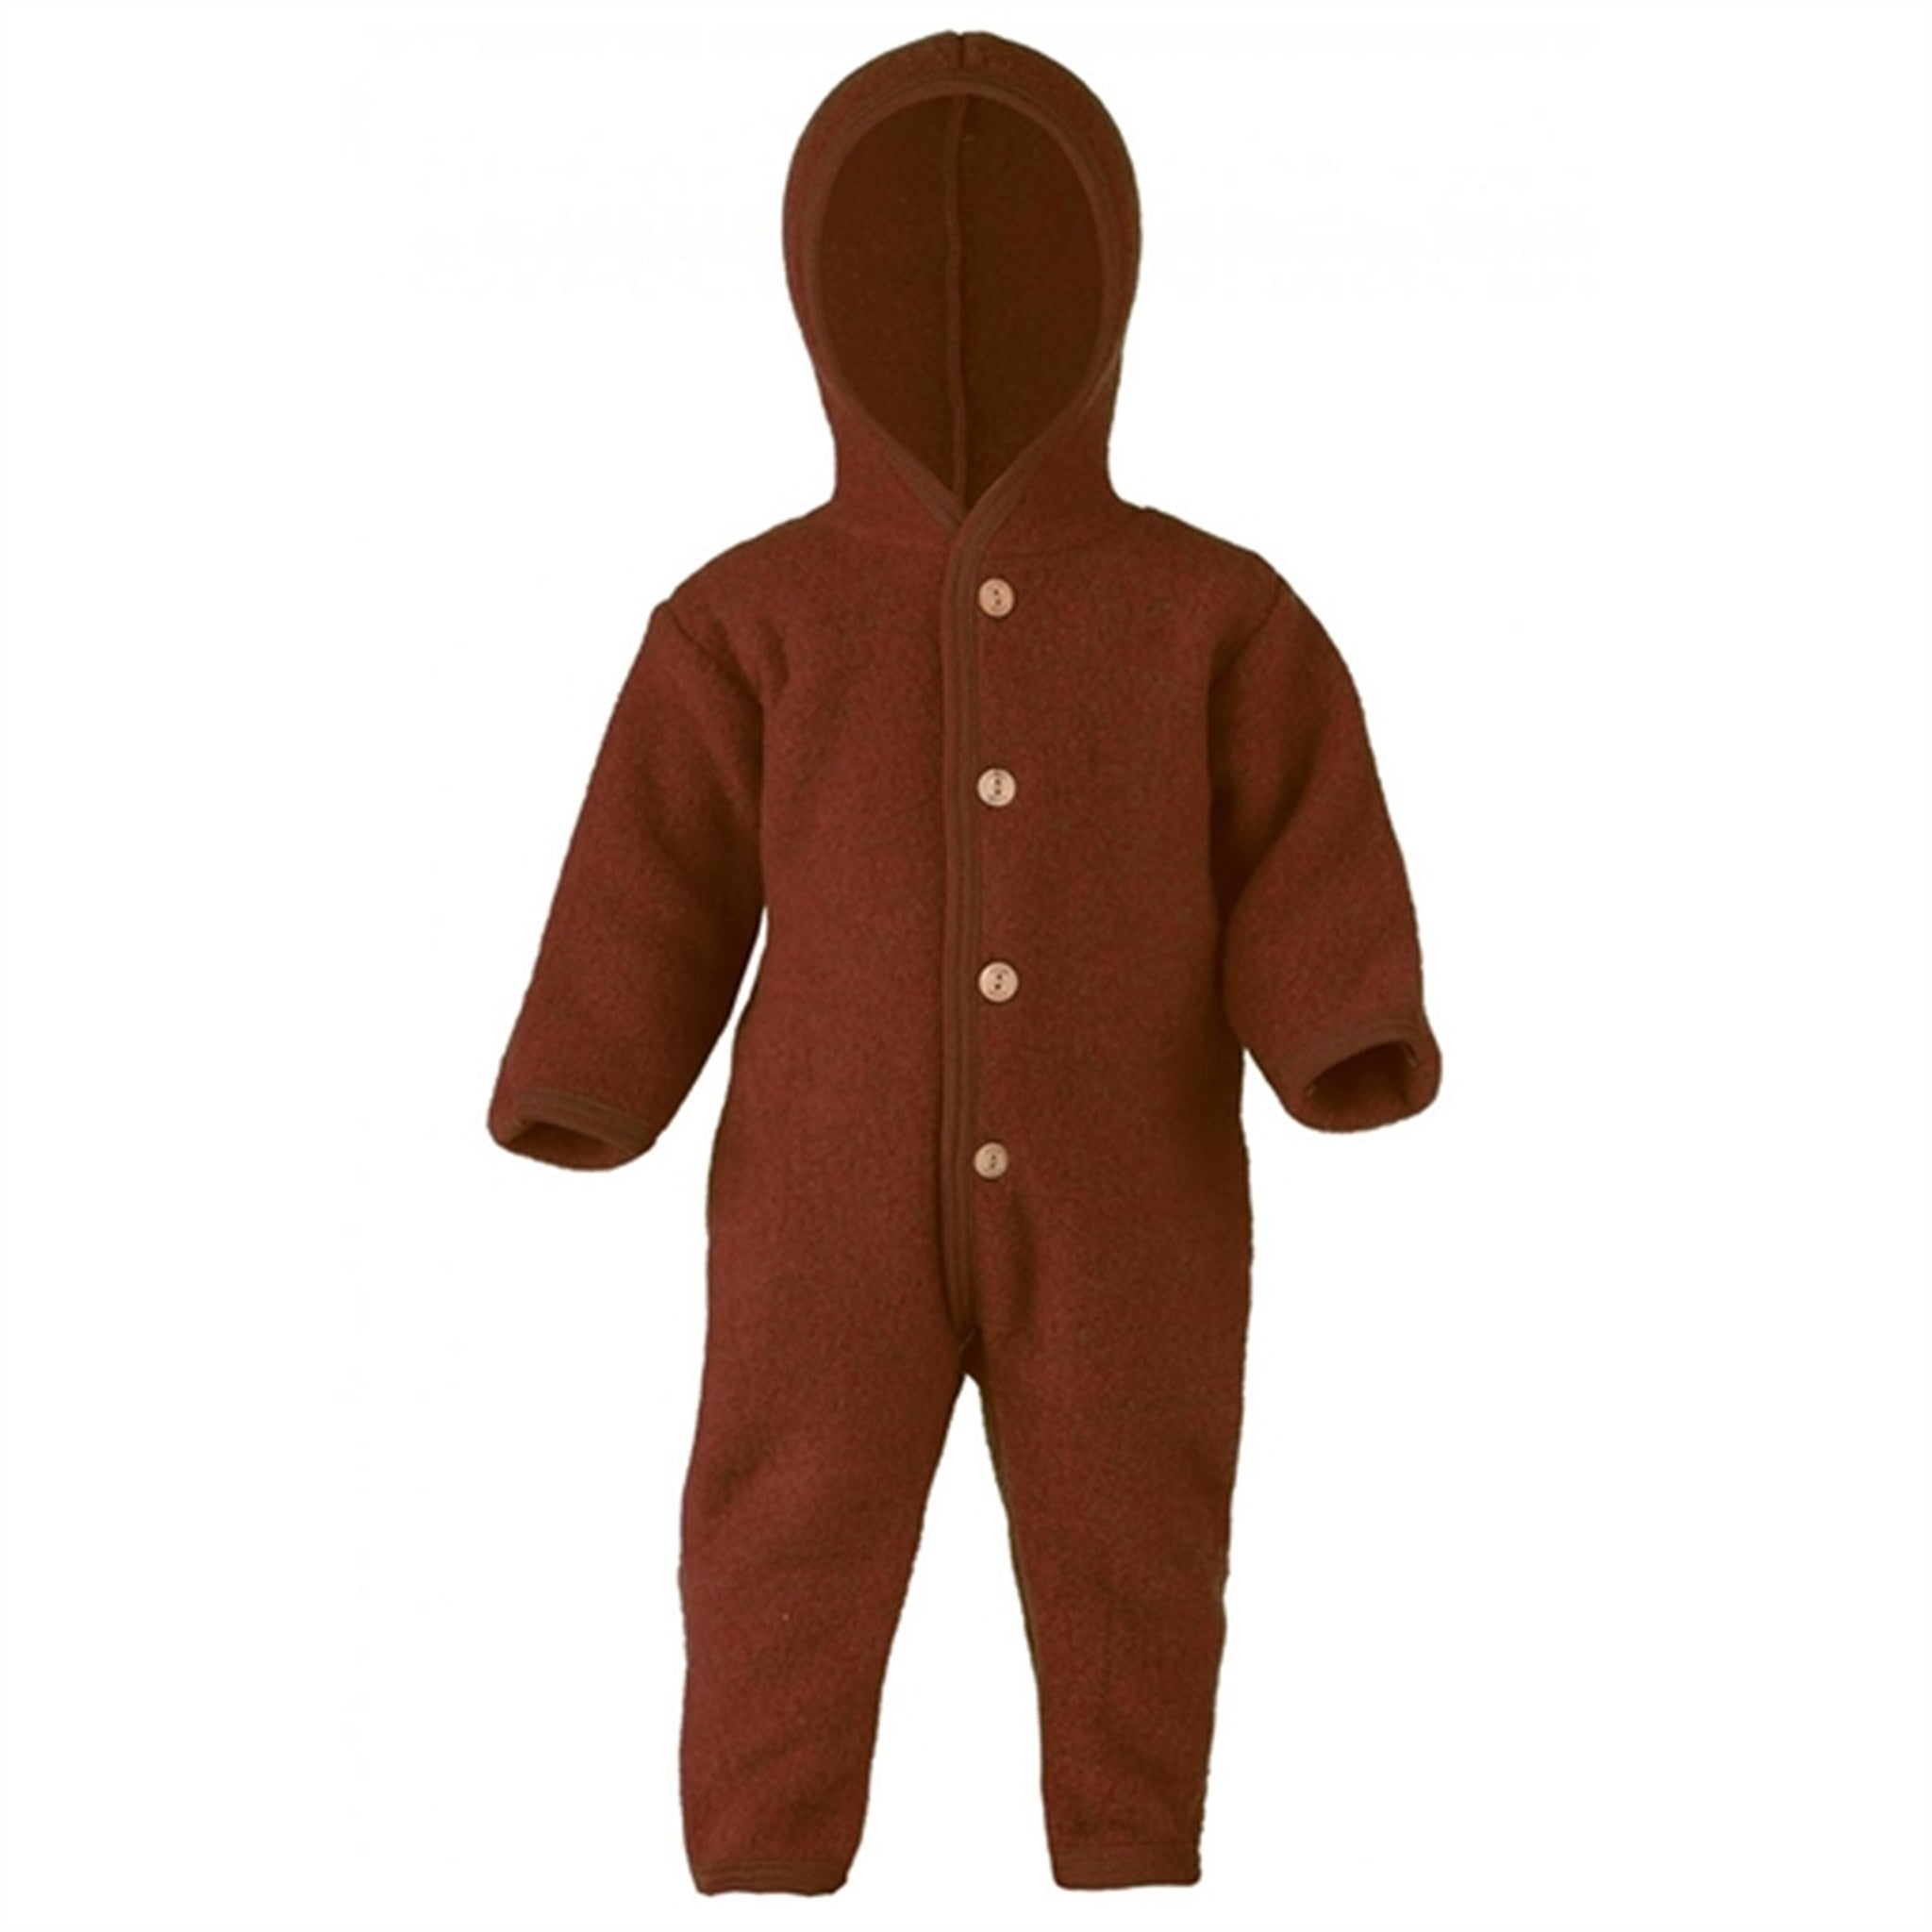 Engel Hooded Overall w. Buttons Cinnamon Mélange